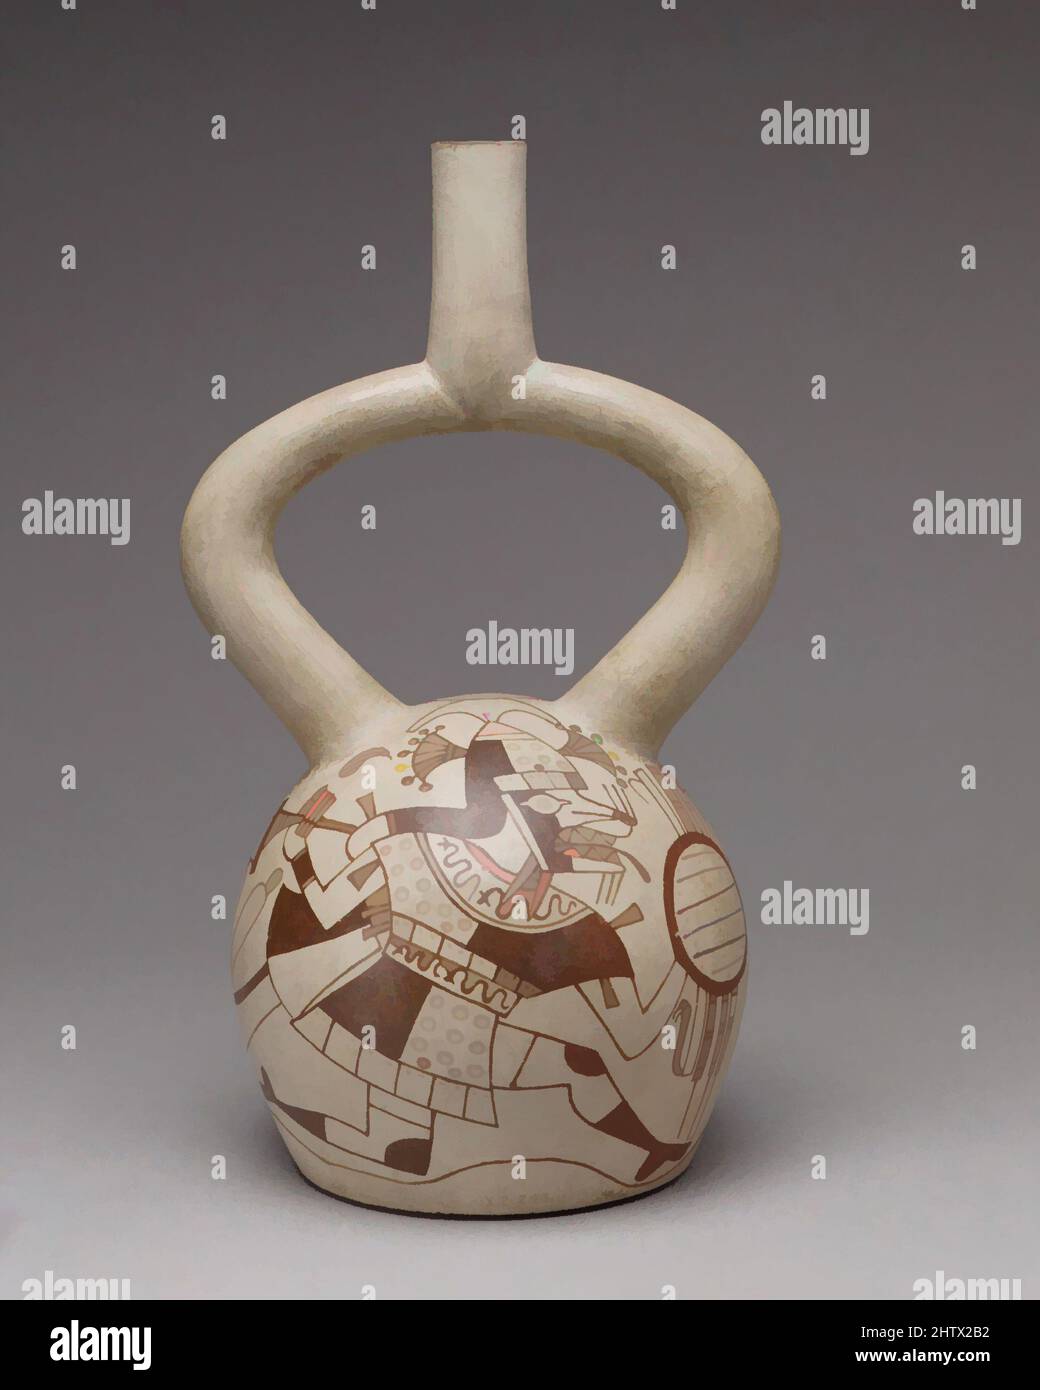 Art inspired by Fox Warrior Bottle, 7th–8th century, Peru, Moche, Ceramic, H.11 5/8 in. (29.46 cm), Ceramics-Containers, The stirrup-spout vessel—the shape of the spout recalls the stirrup on a horse's saddle—was a much favored bottle shape on Peru's northern coast for about 3,000, Classic works modernized by Artotop with a splash of modernity. Shapes, color and value, eye-catching visual impact on art. Emotions through freedom of artworks in a contemporary way. A timeless message pursuing a wildly creative new direction. Artists turning to the digital medium and creating the Artotop NFT Stock Photo